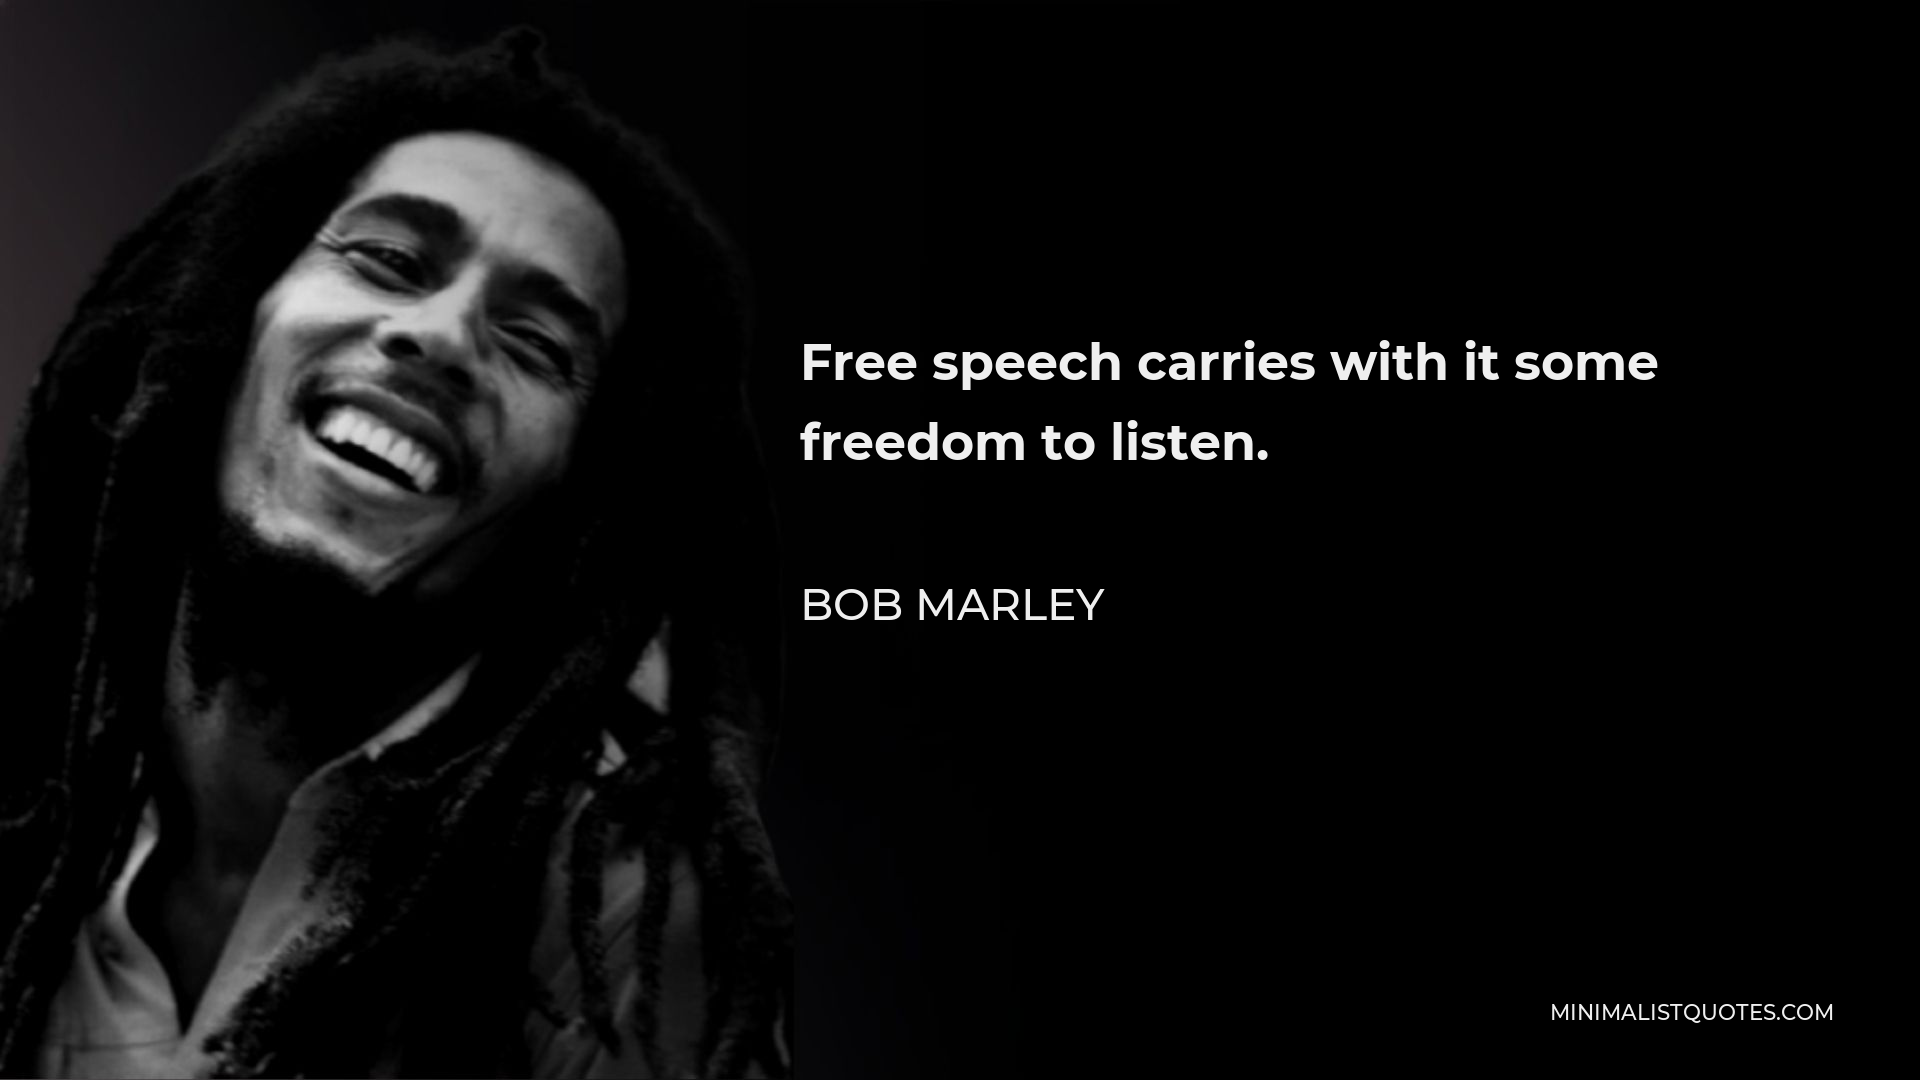 Bob Marley Quote - Free speech carries with it some freedom to listen.